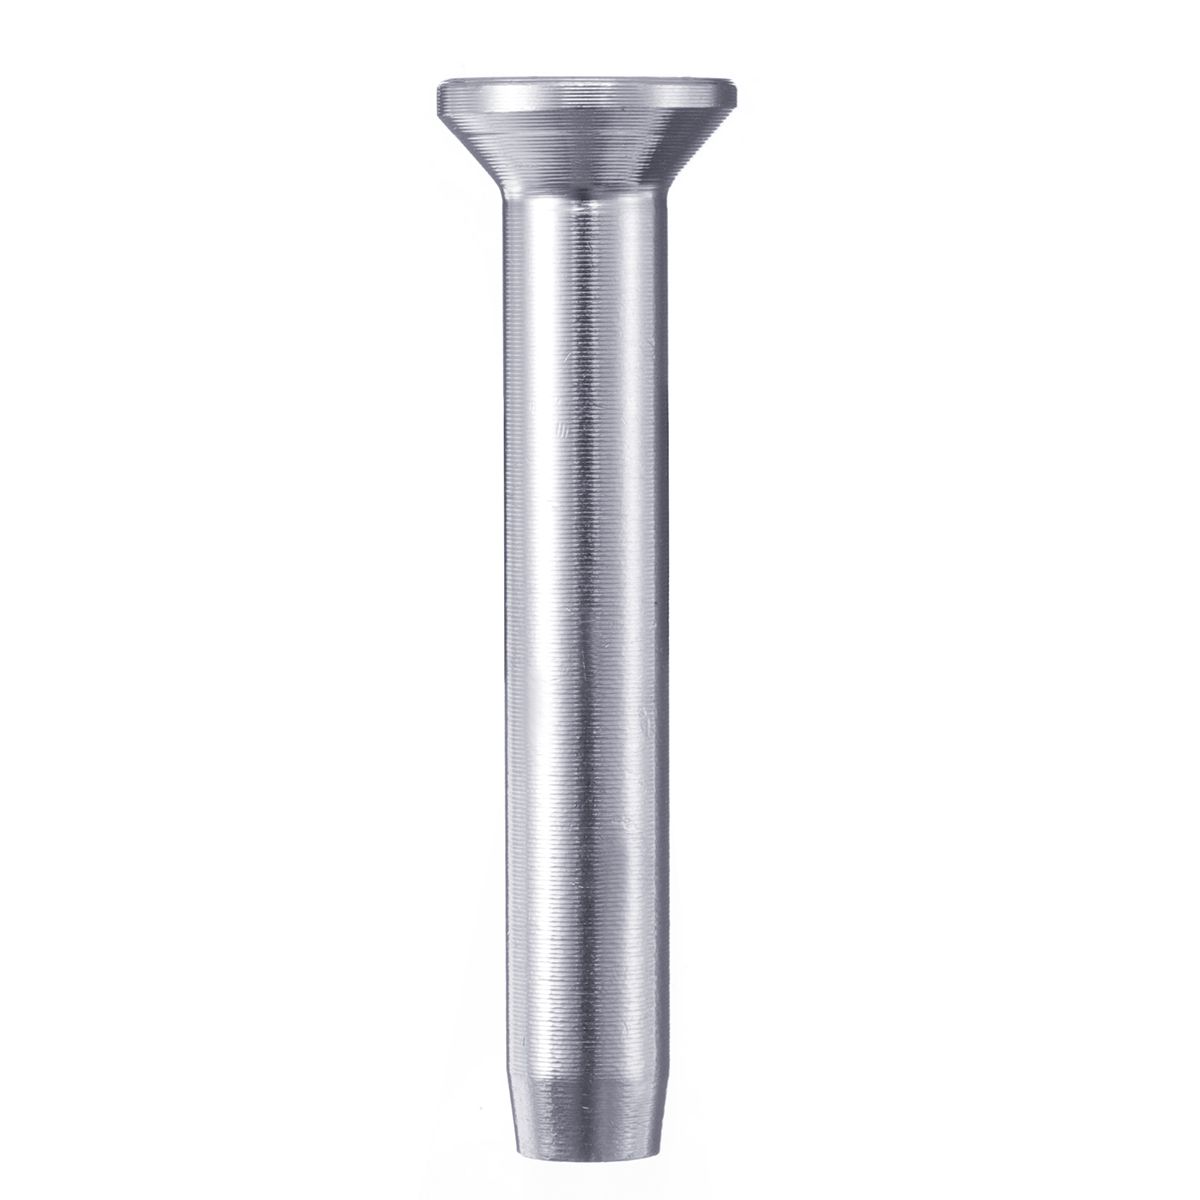 10Pcs-Stainless-Steel-Stemball-Swage-Hand-Crimp-Metal-Post-18quot-Cable-Railing-Screw-1441905